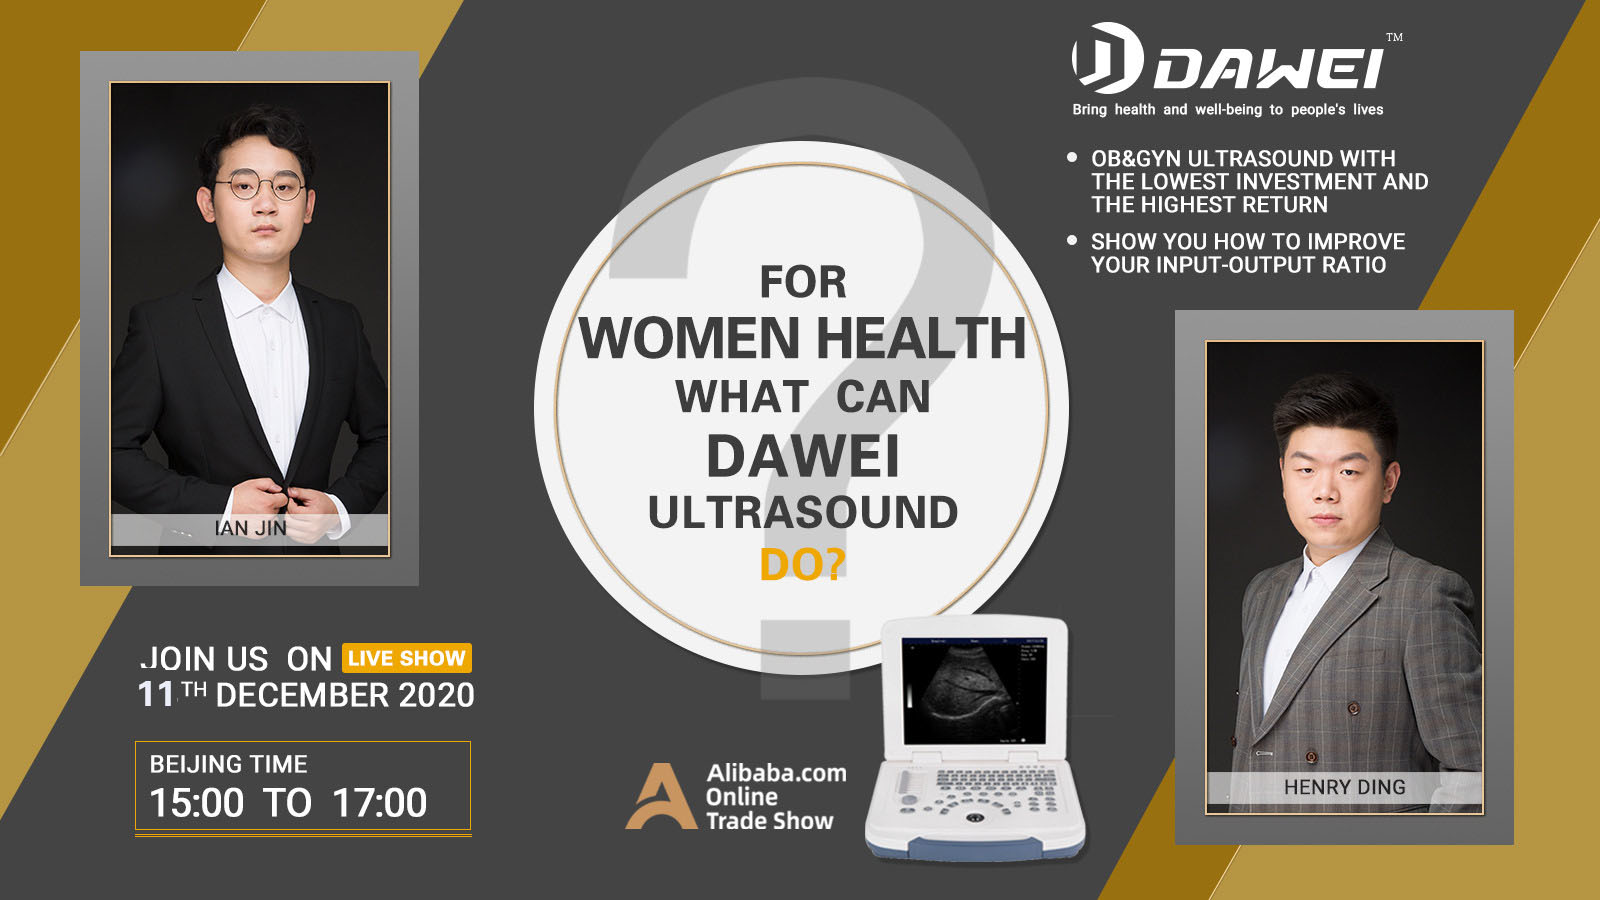 Dawei Live Show of ultrasound scanners